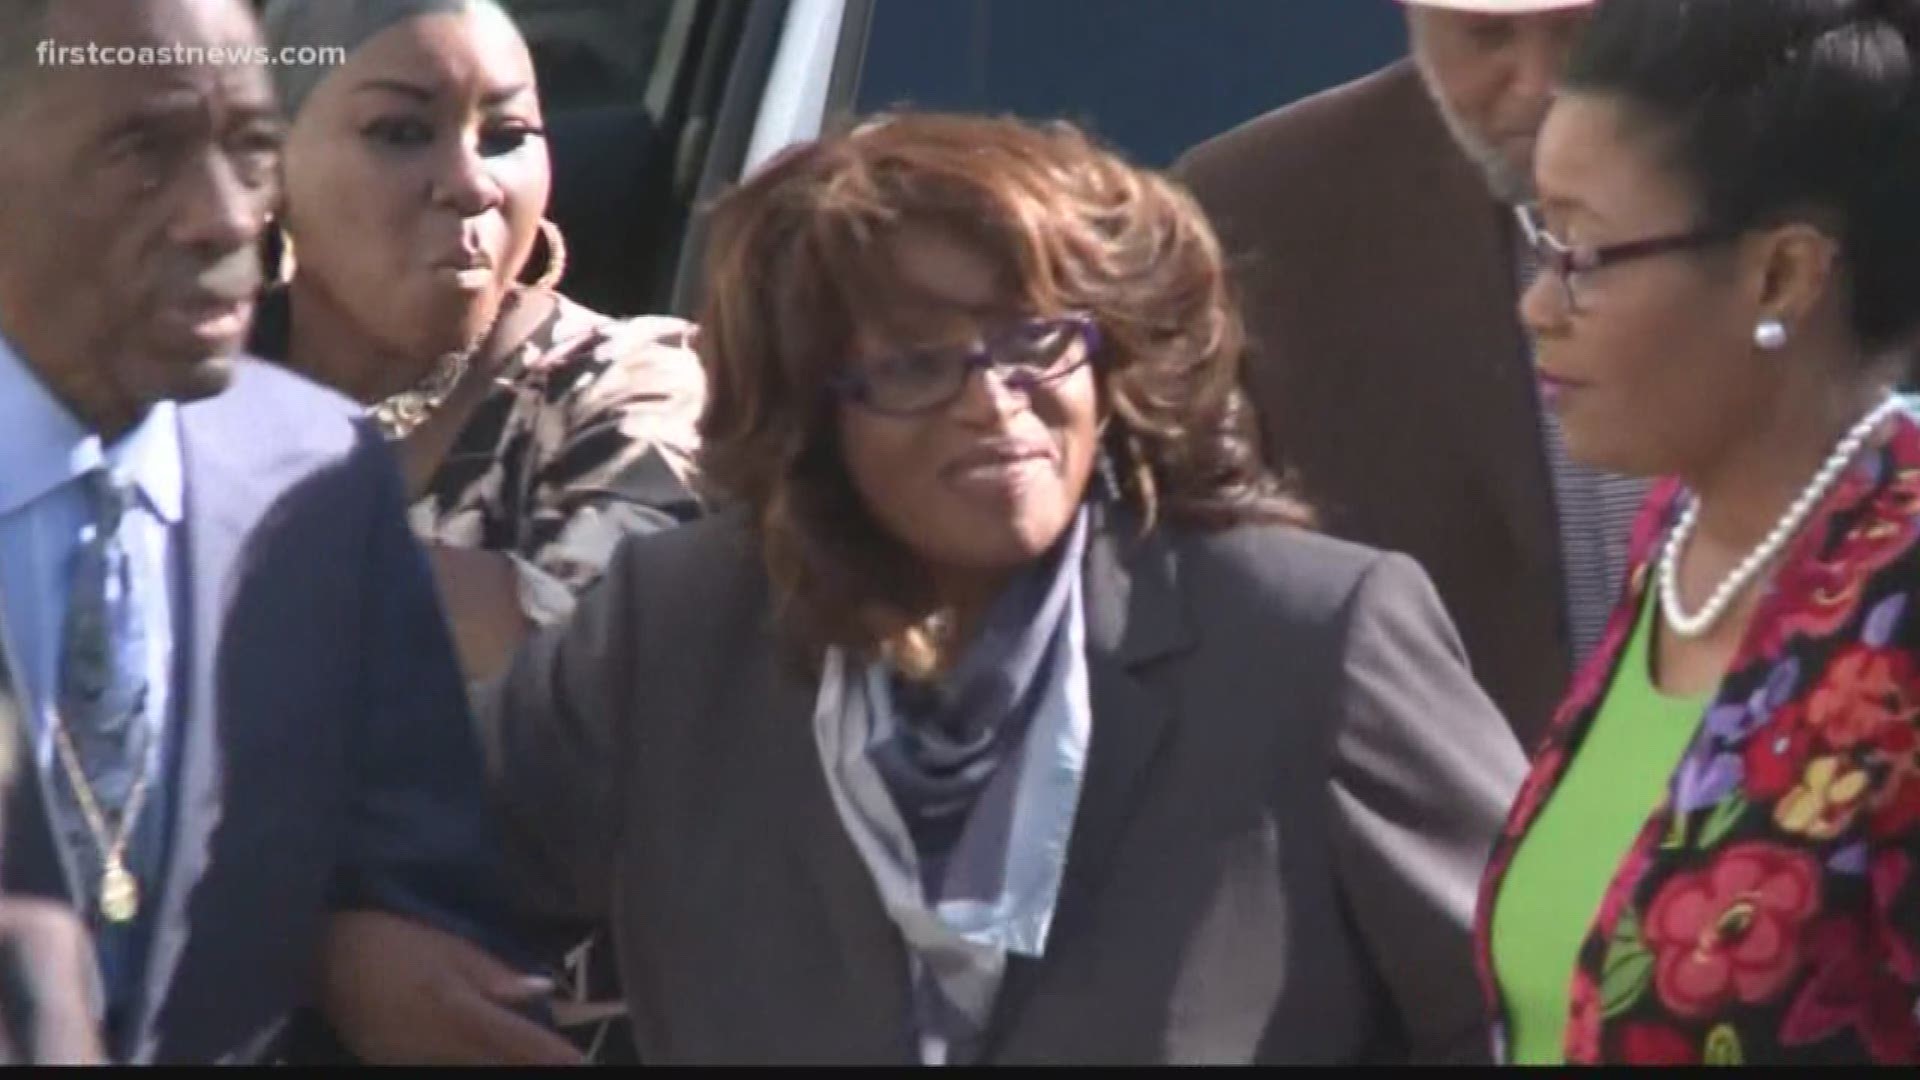 Corrine Brown should stay in prison, according to a formal response from federal prosecutors regarding the appeal of her sentence.